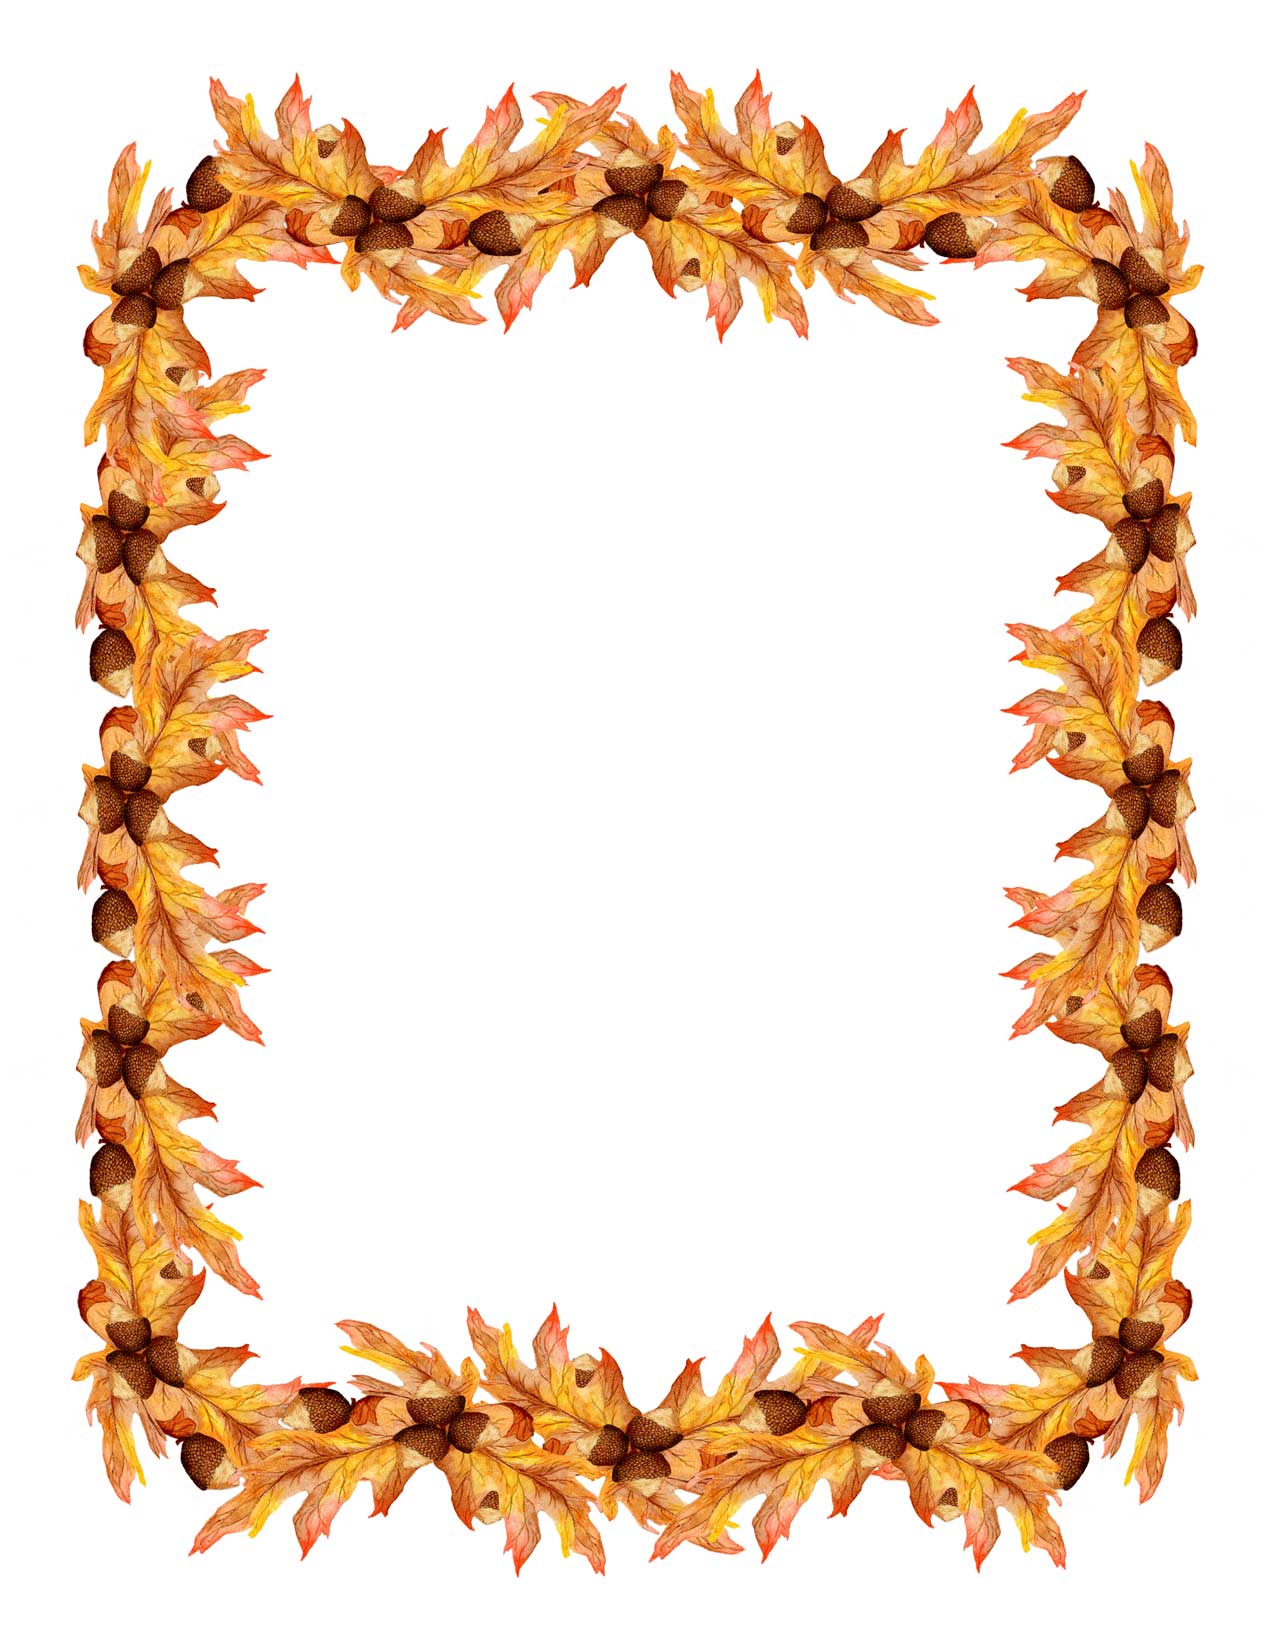 Fall Leaves Border Clipart   Clipart Panda   Free Clipart Images